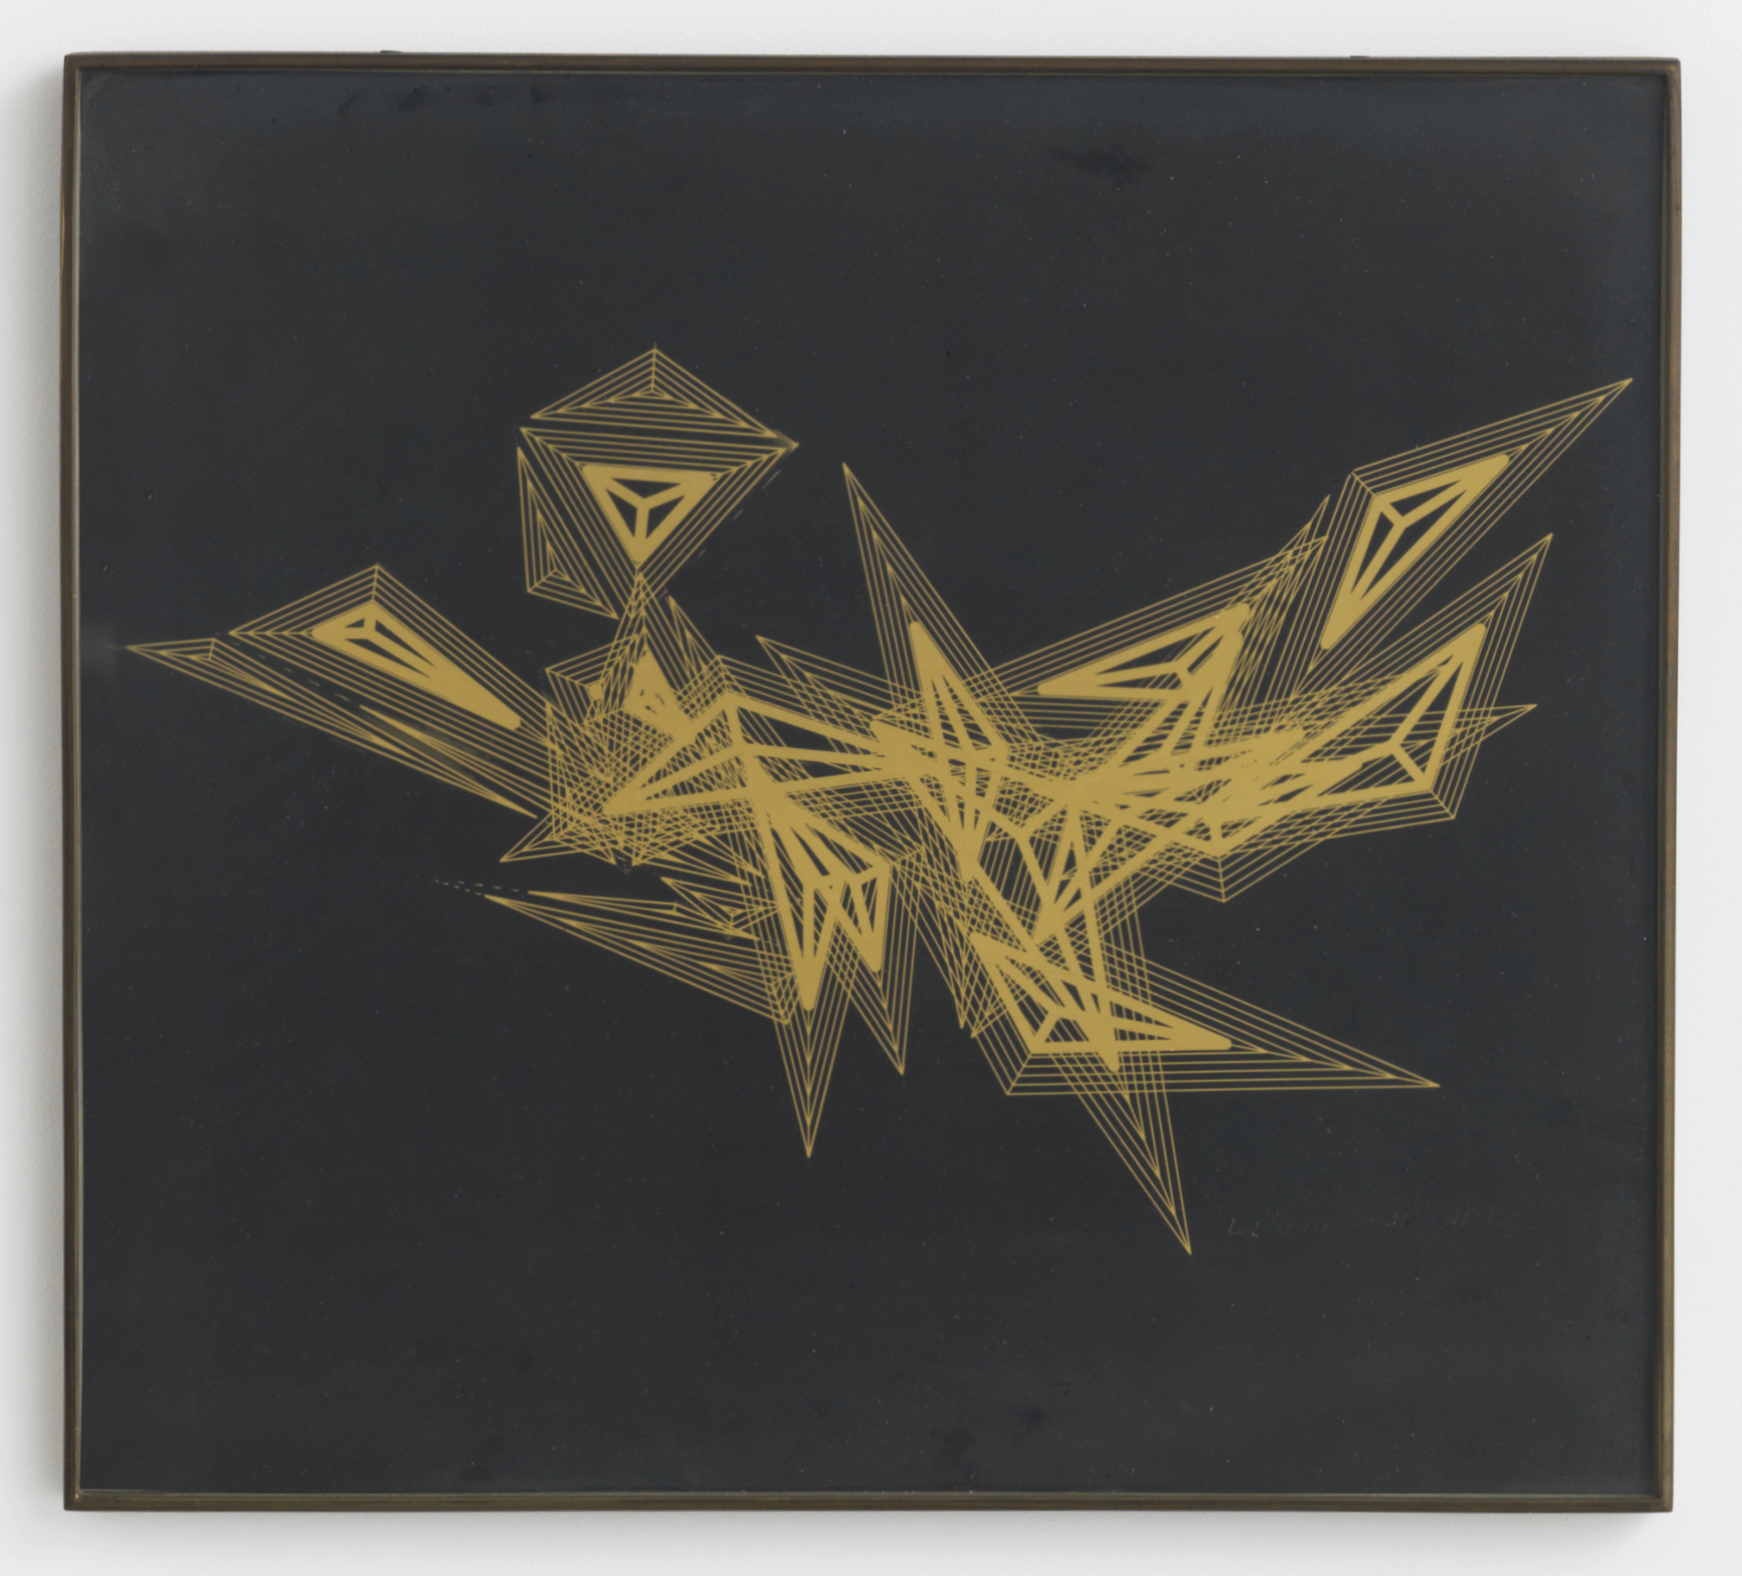 Lillian Schwartz, Charms, 1970, gold integrated circuit, framed: 18.25h x 20.38w in.